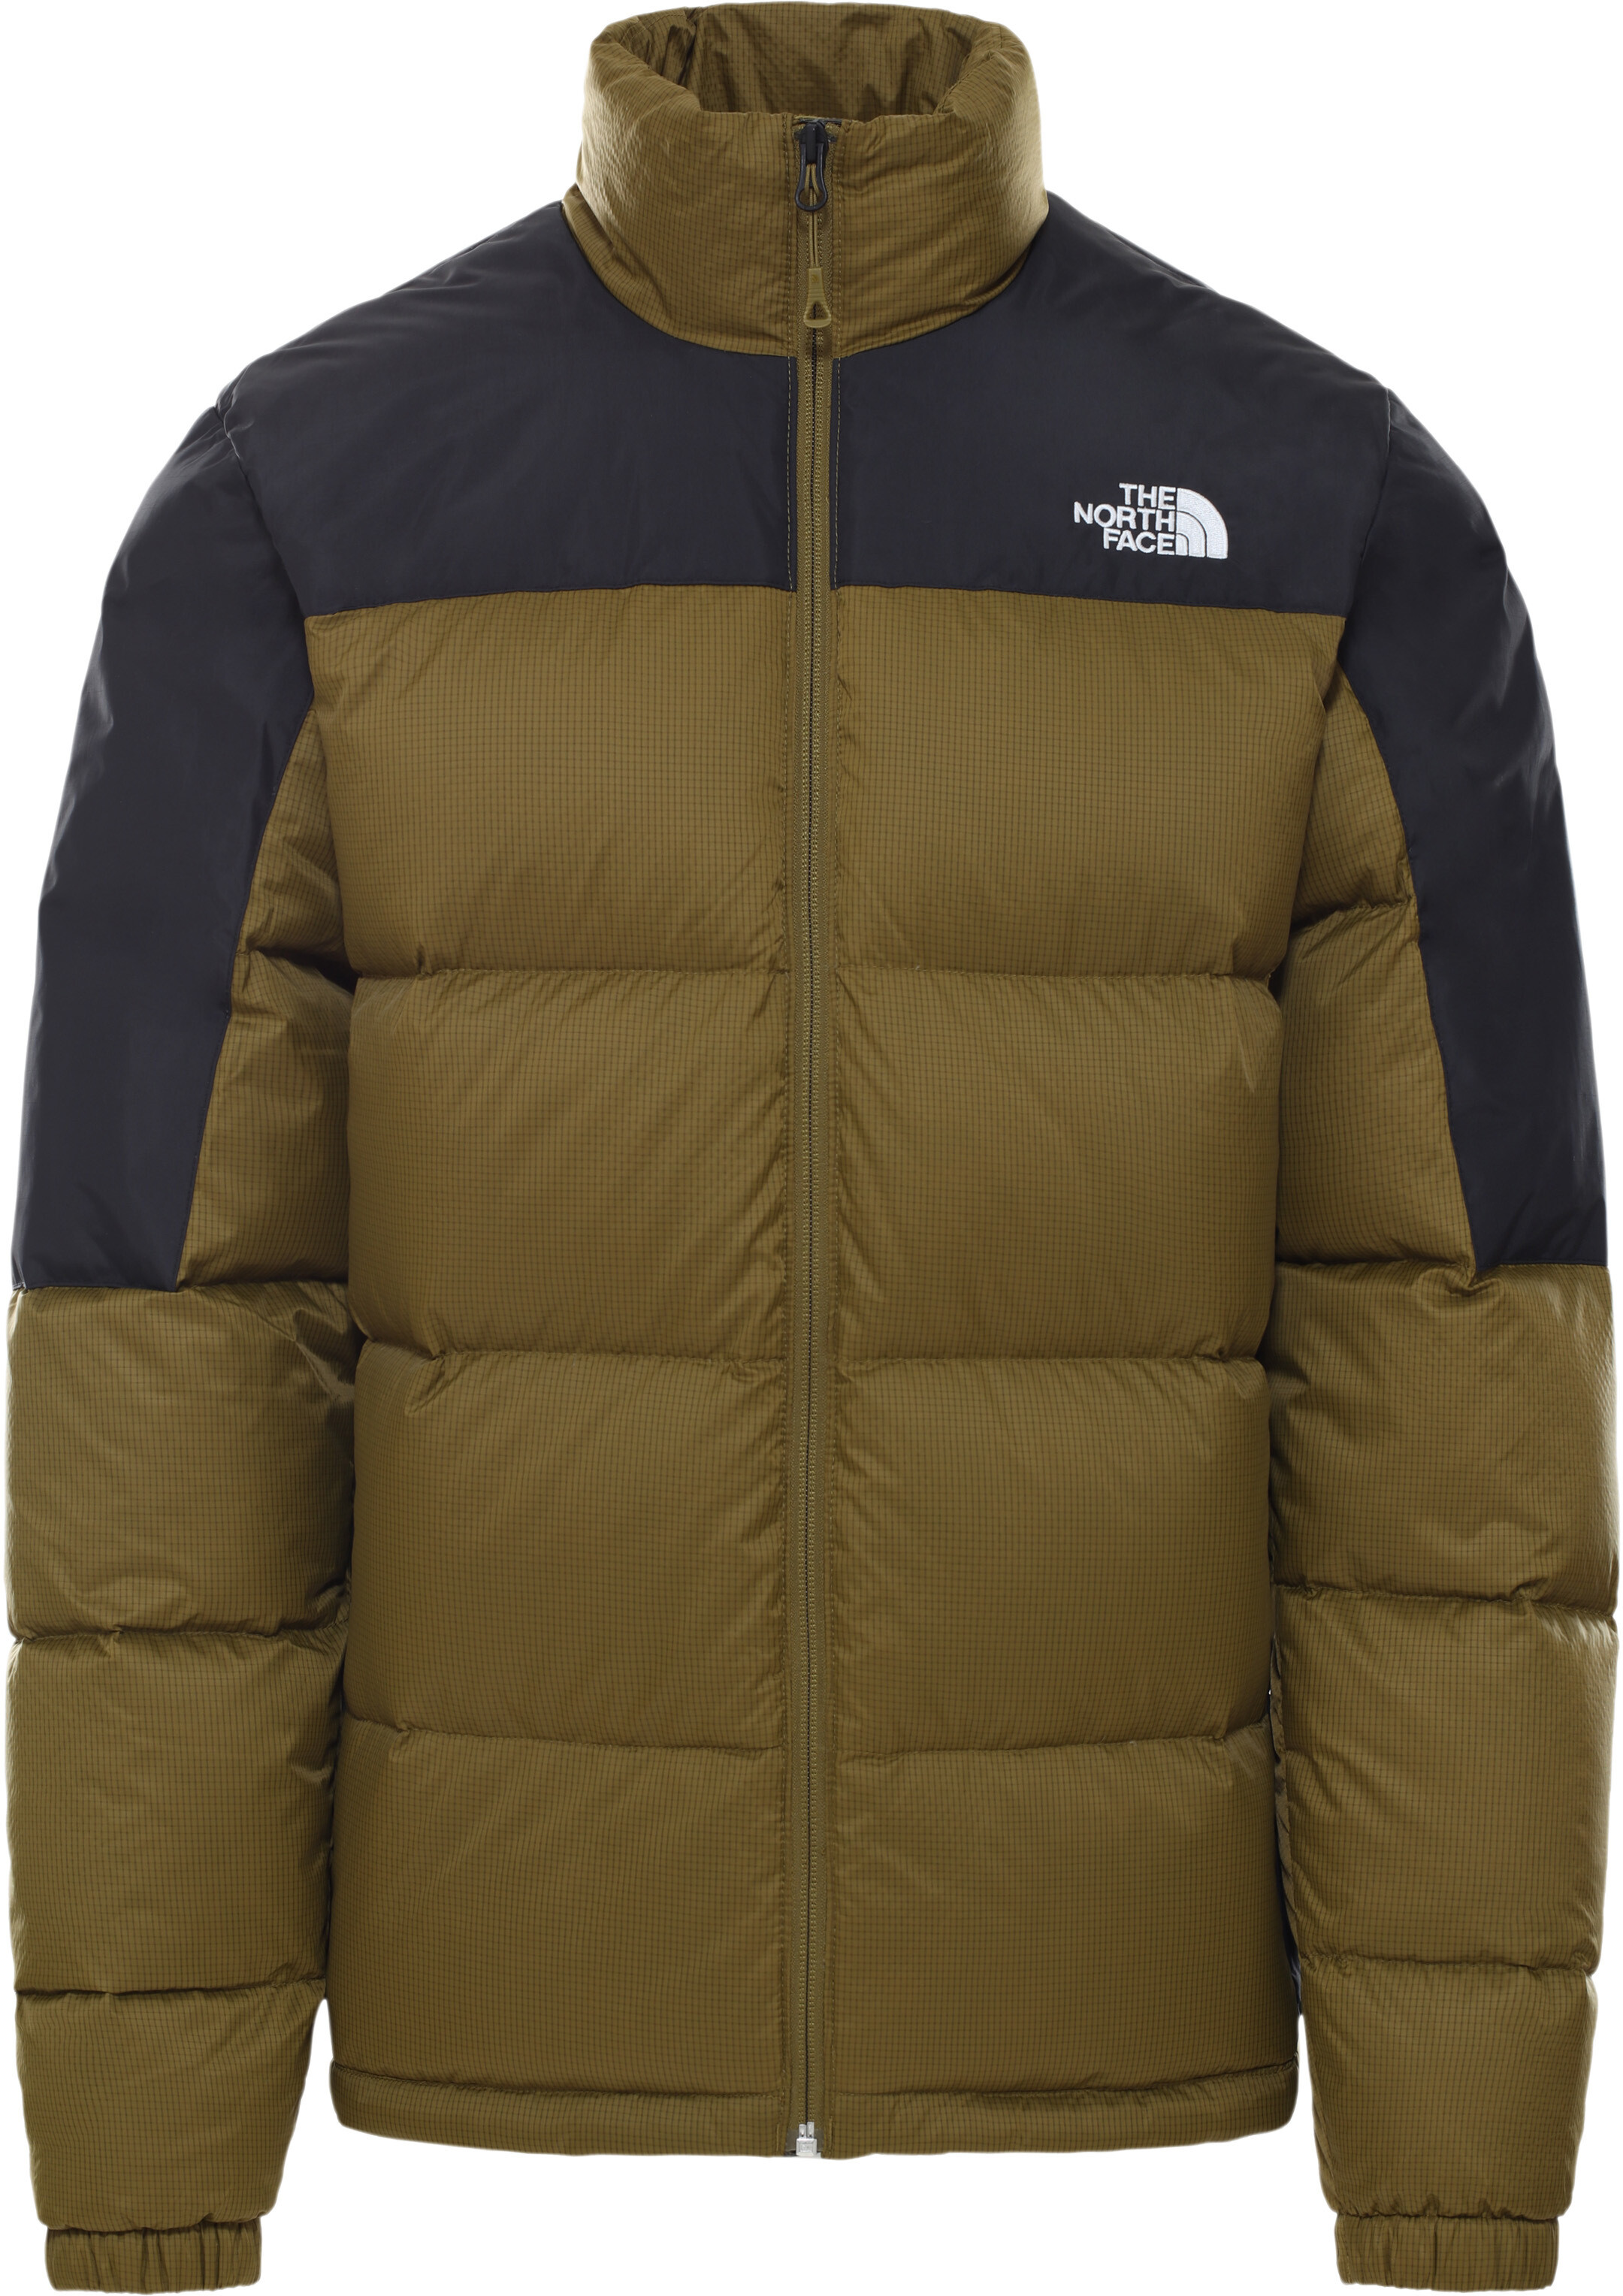 The North Face Diablo Down Jacket Men fir green/TNF black at addnature ...